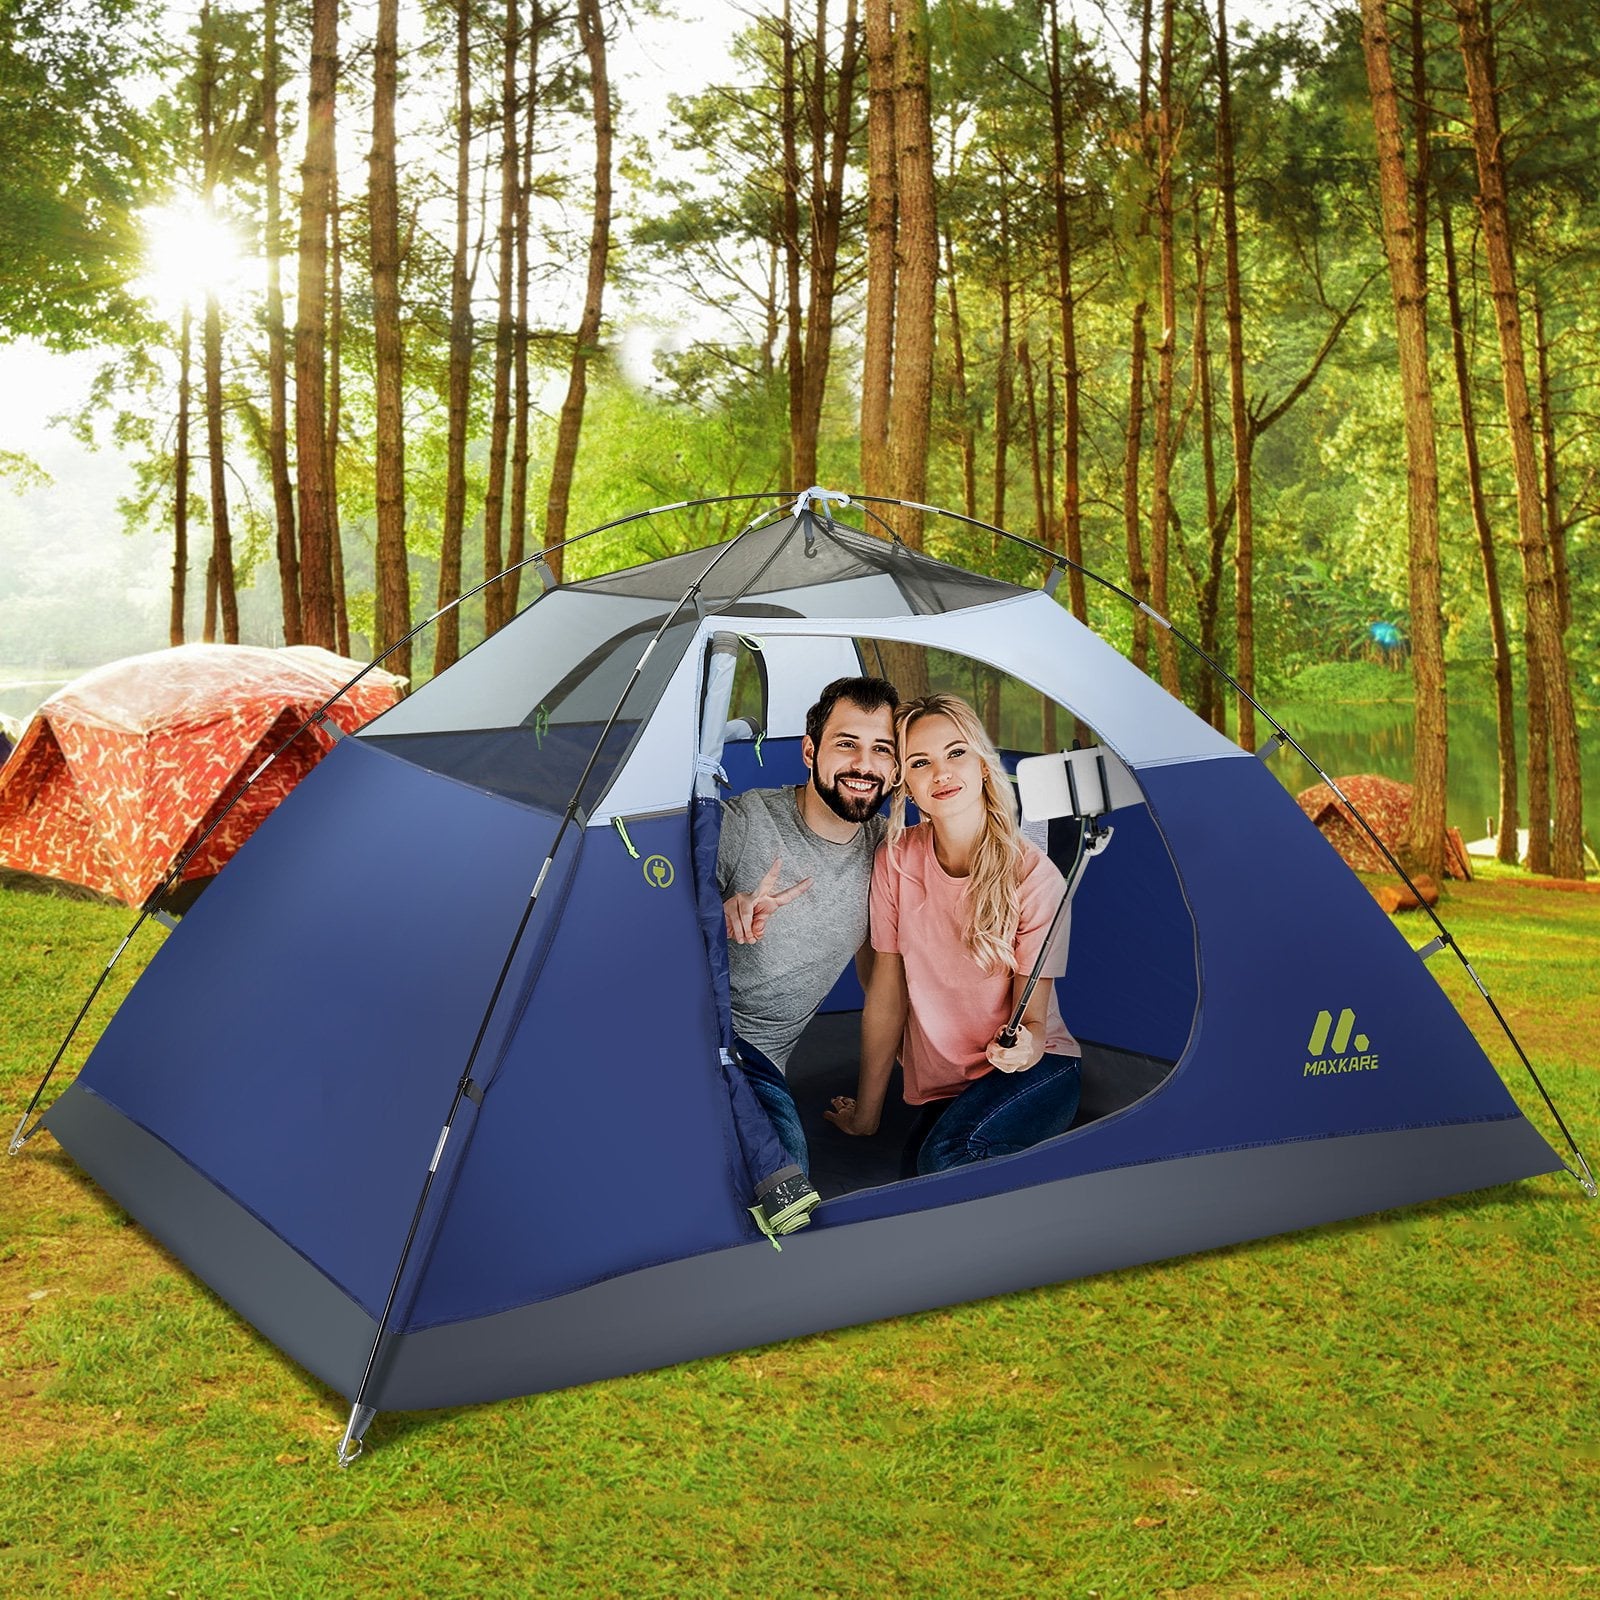 MaxKare 2 Person Camp Tent, Waterproof Easy Set up Dome Tent for Camping, Backpacking & Hiking, Fishing Outdoor - Blue